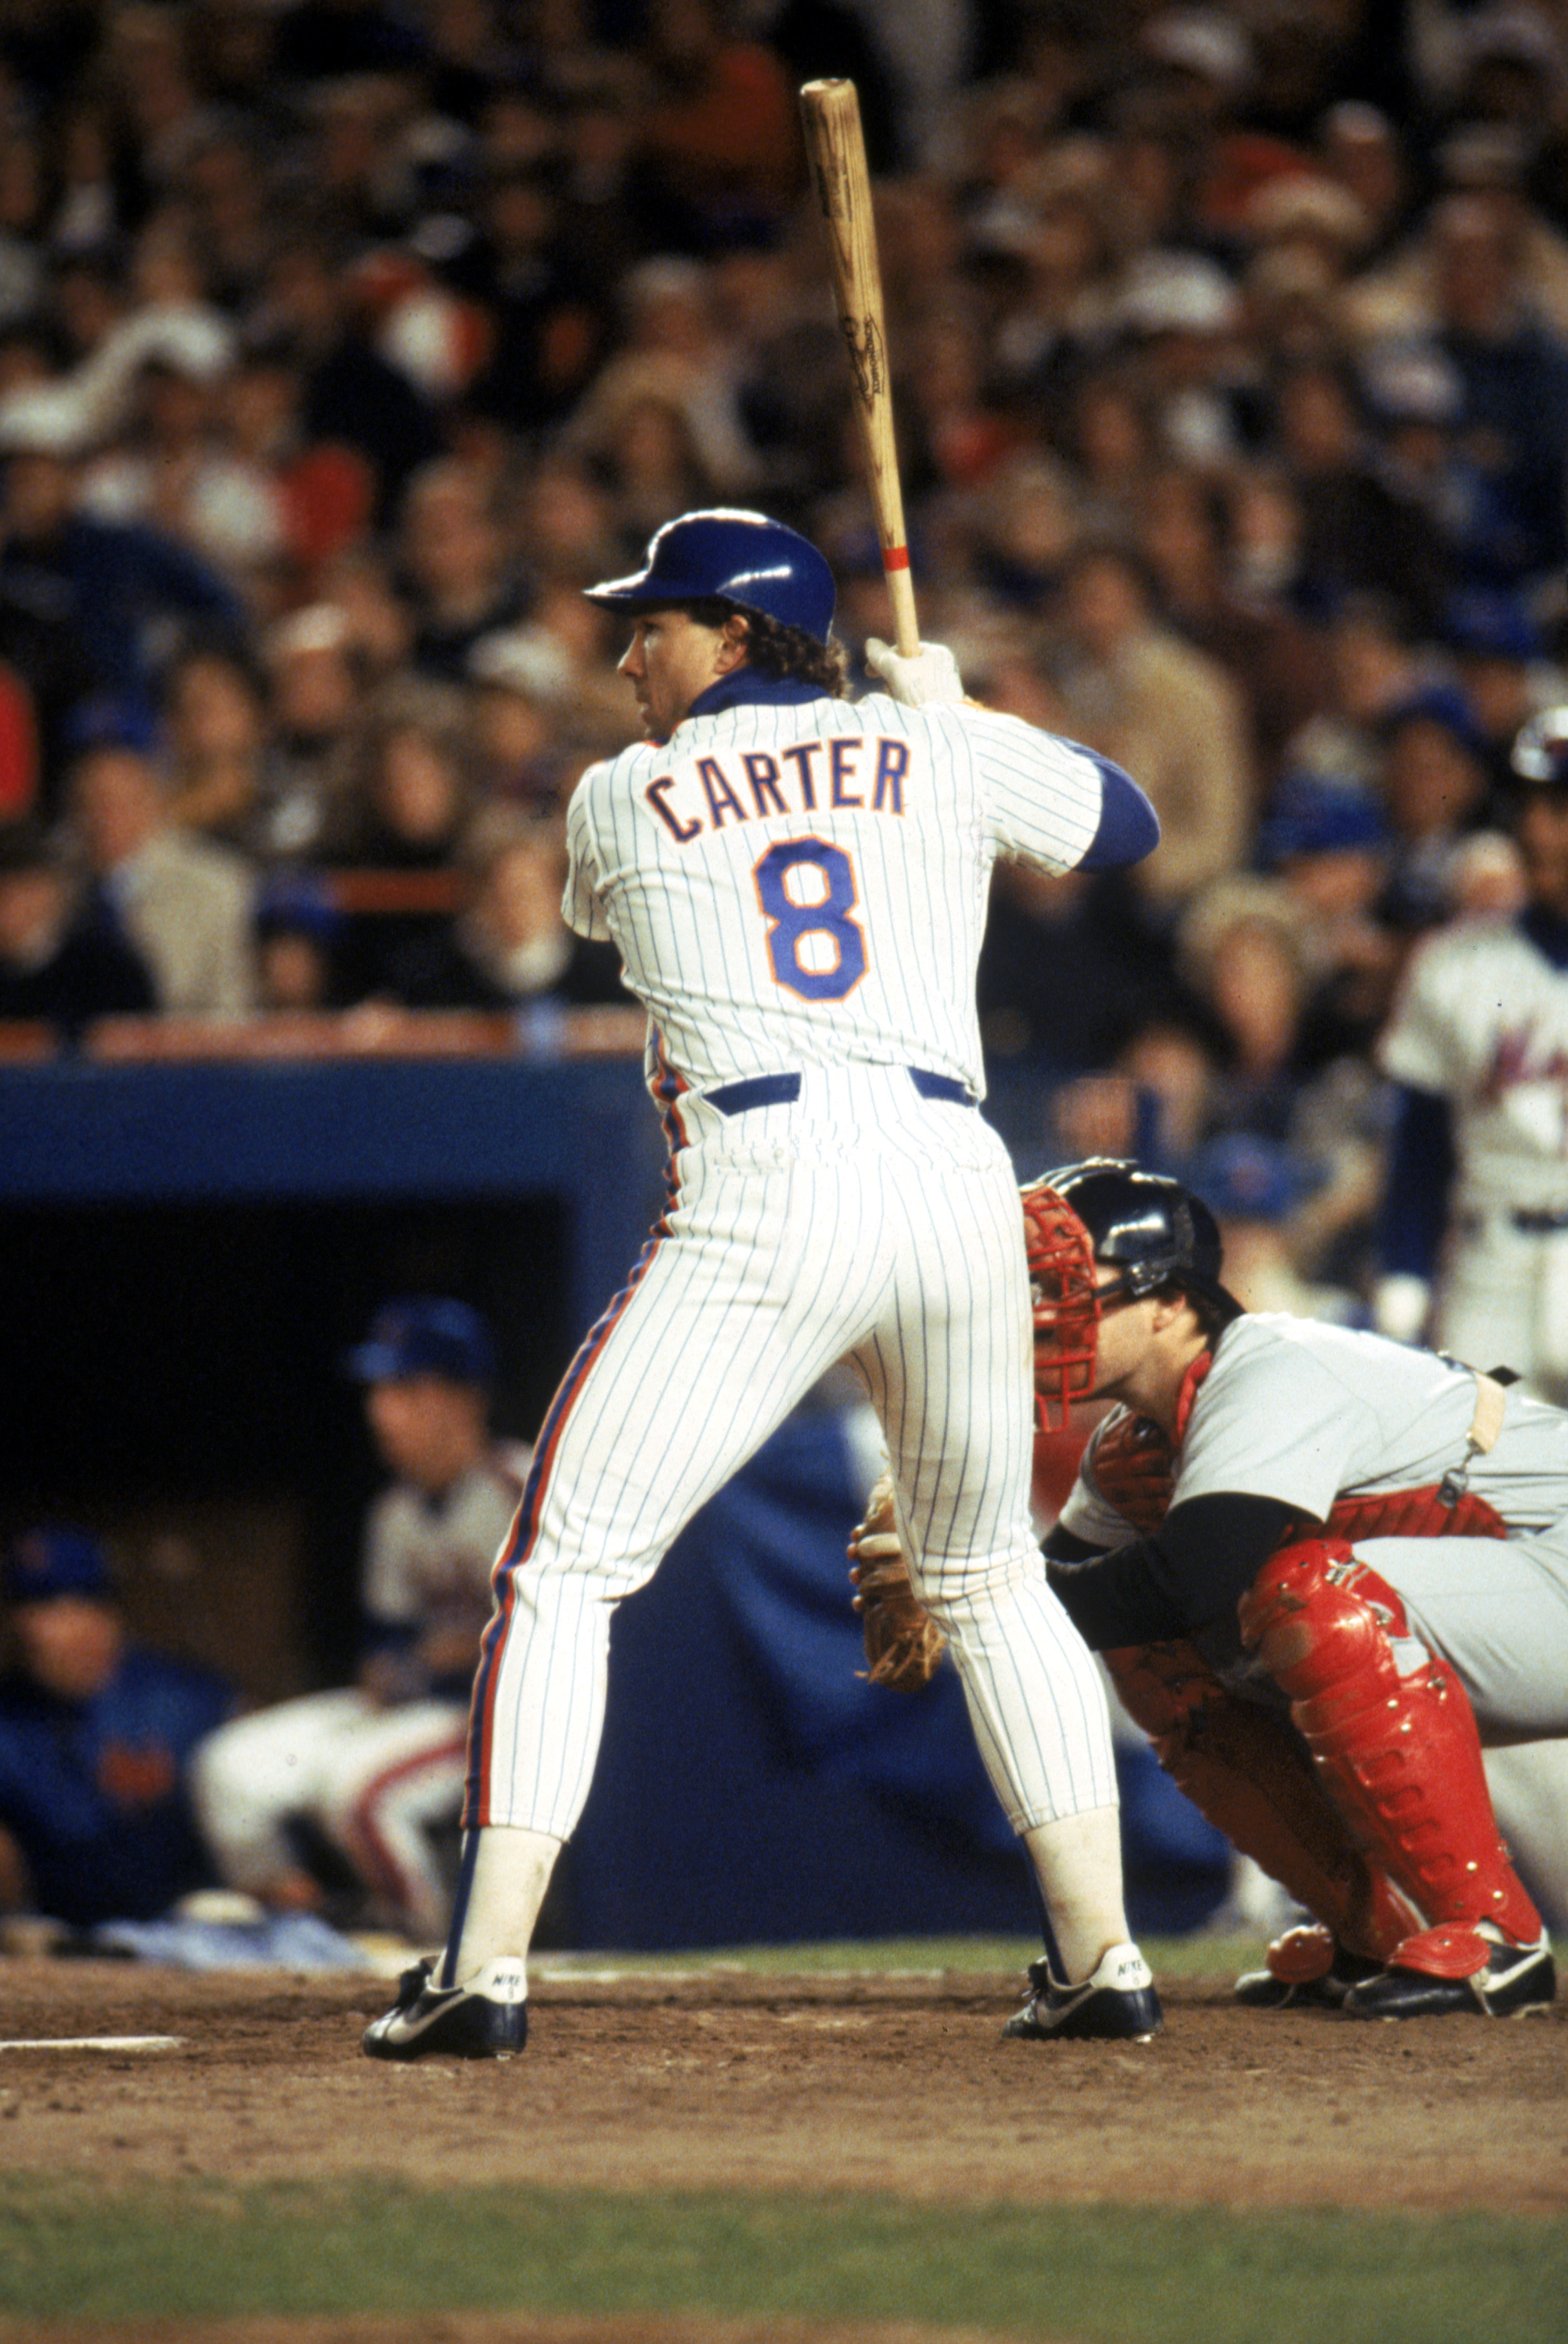 NEW YORK - 1986:  Gary Carter #8 of the New York Mets readies for the pitch during the 1986 World Series game against the Boston Red Sox at Shea Stadium in New York City, New York. The Mets won 4-3. (Photo by Getty Images)